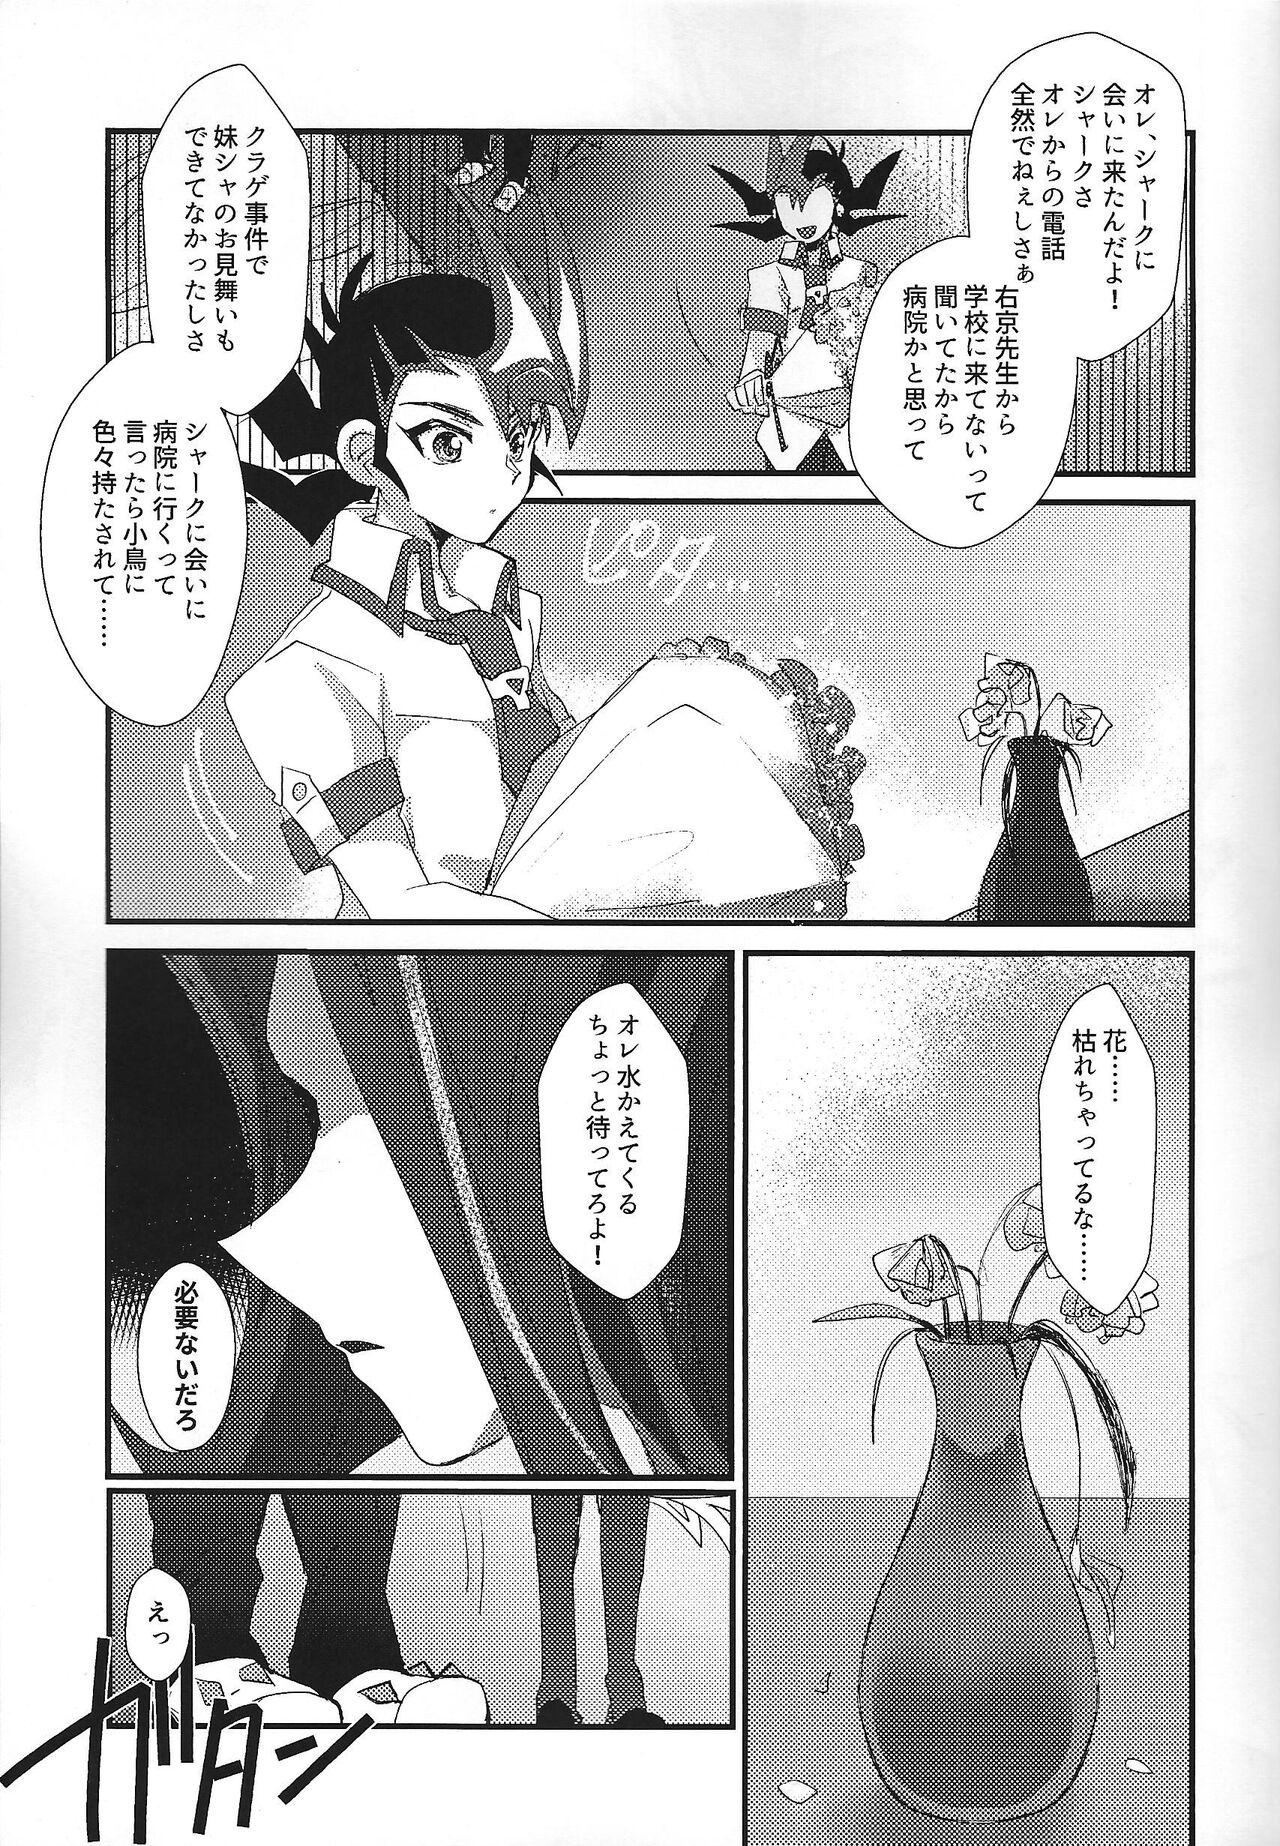 This NEVEREVERLAND - Yu-gi-oh zexal Milf Cougar - Page 10